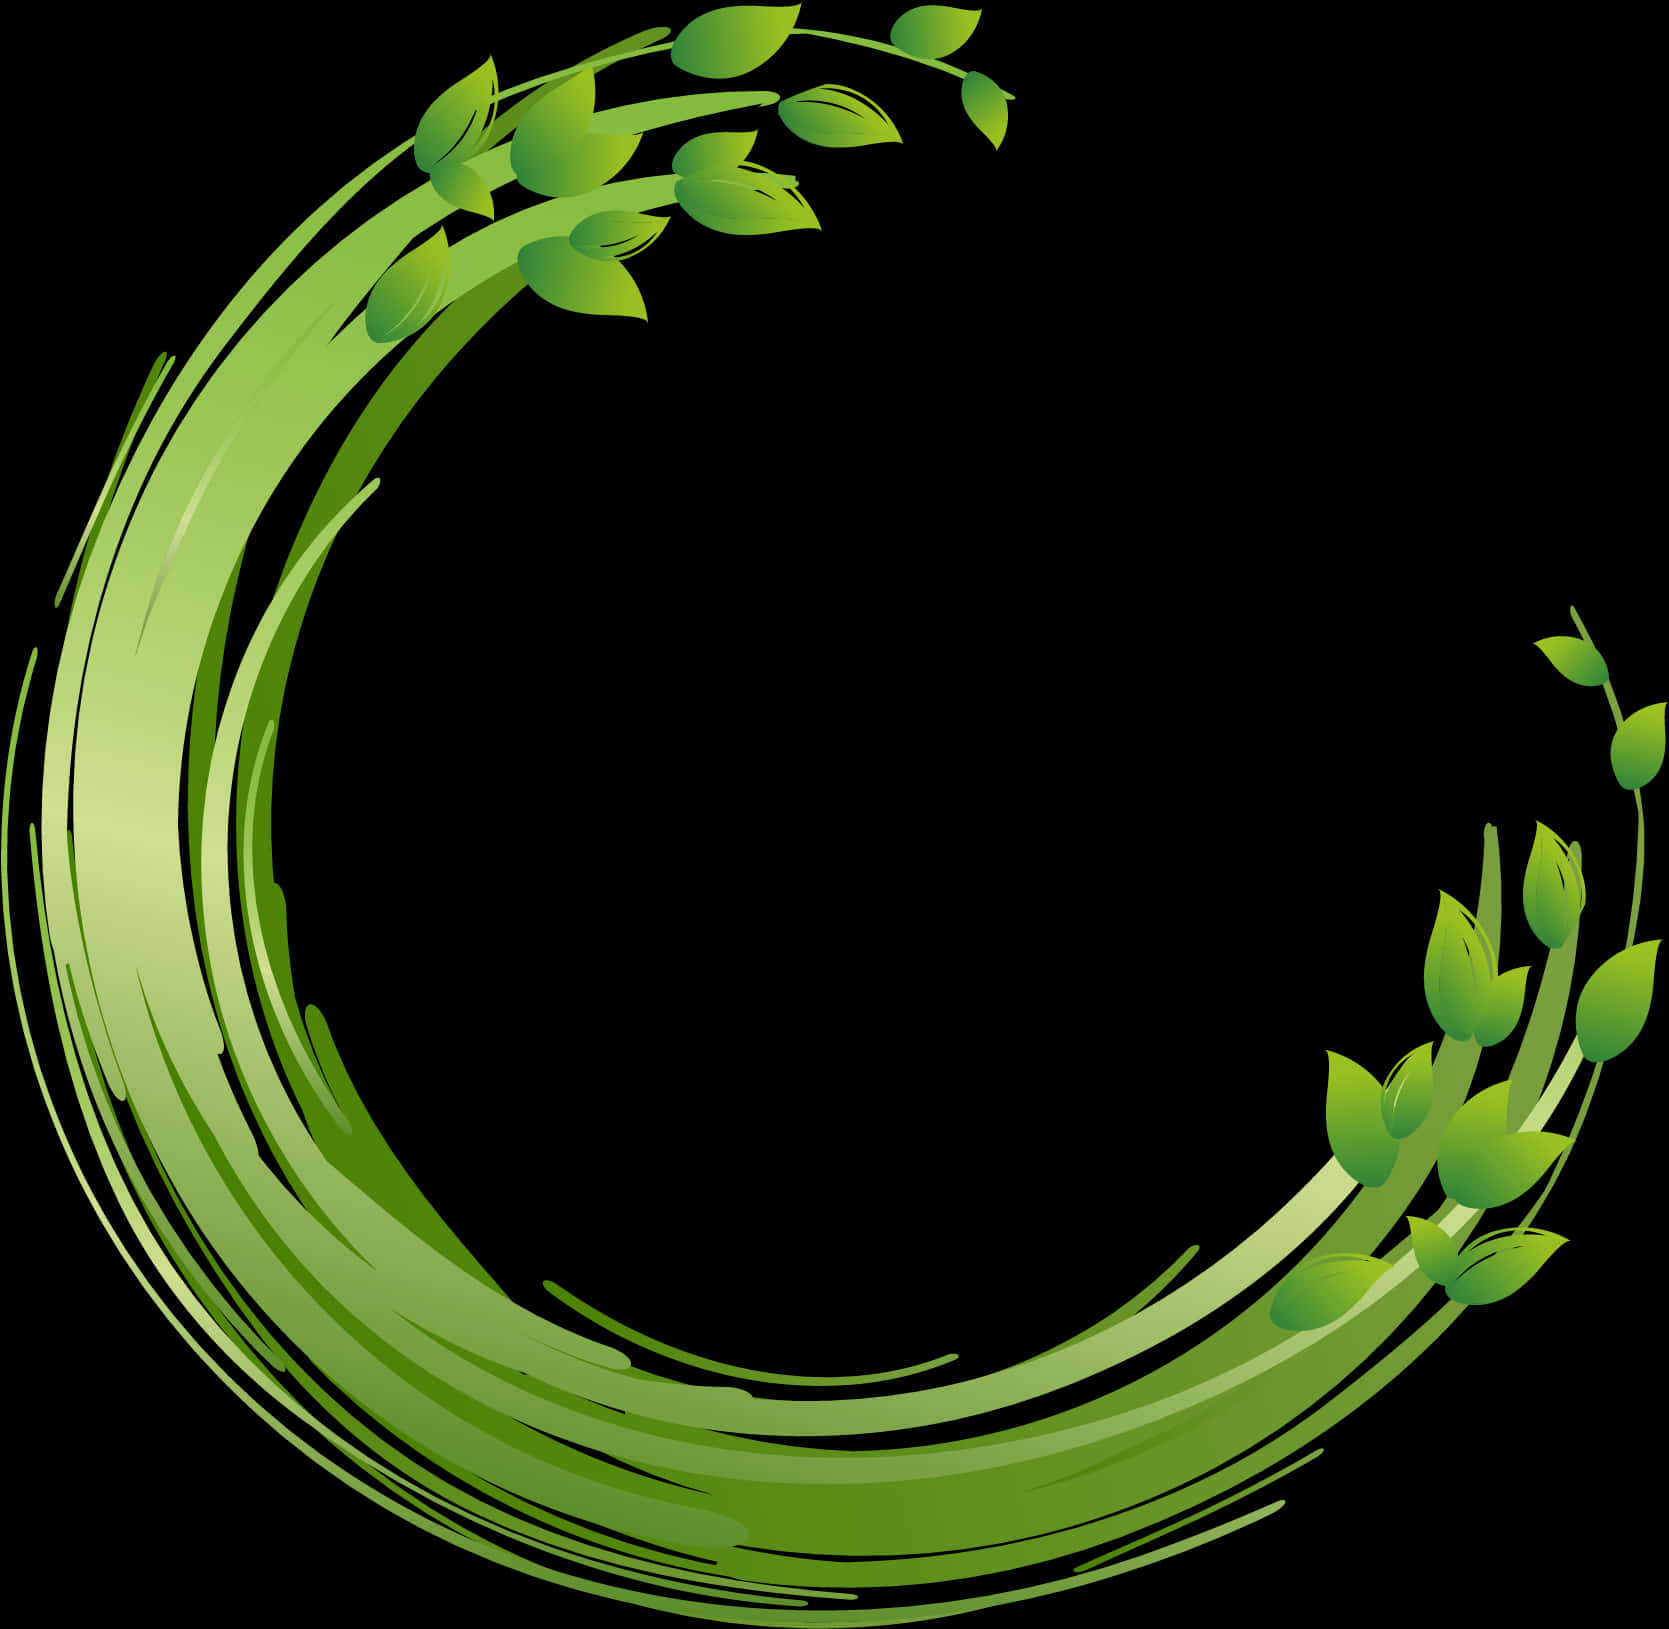 A Green Swirly Circle With Leaves